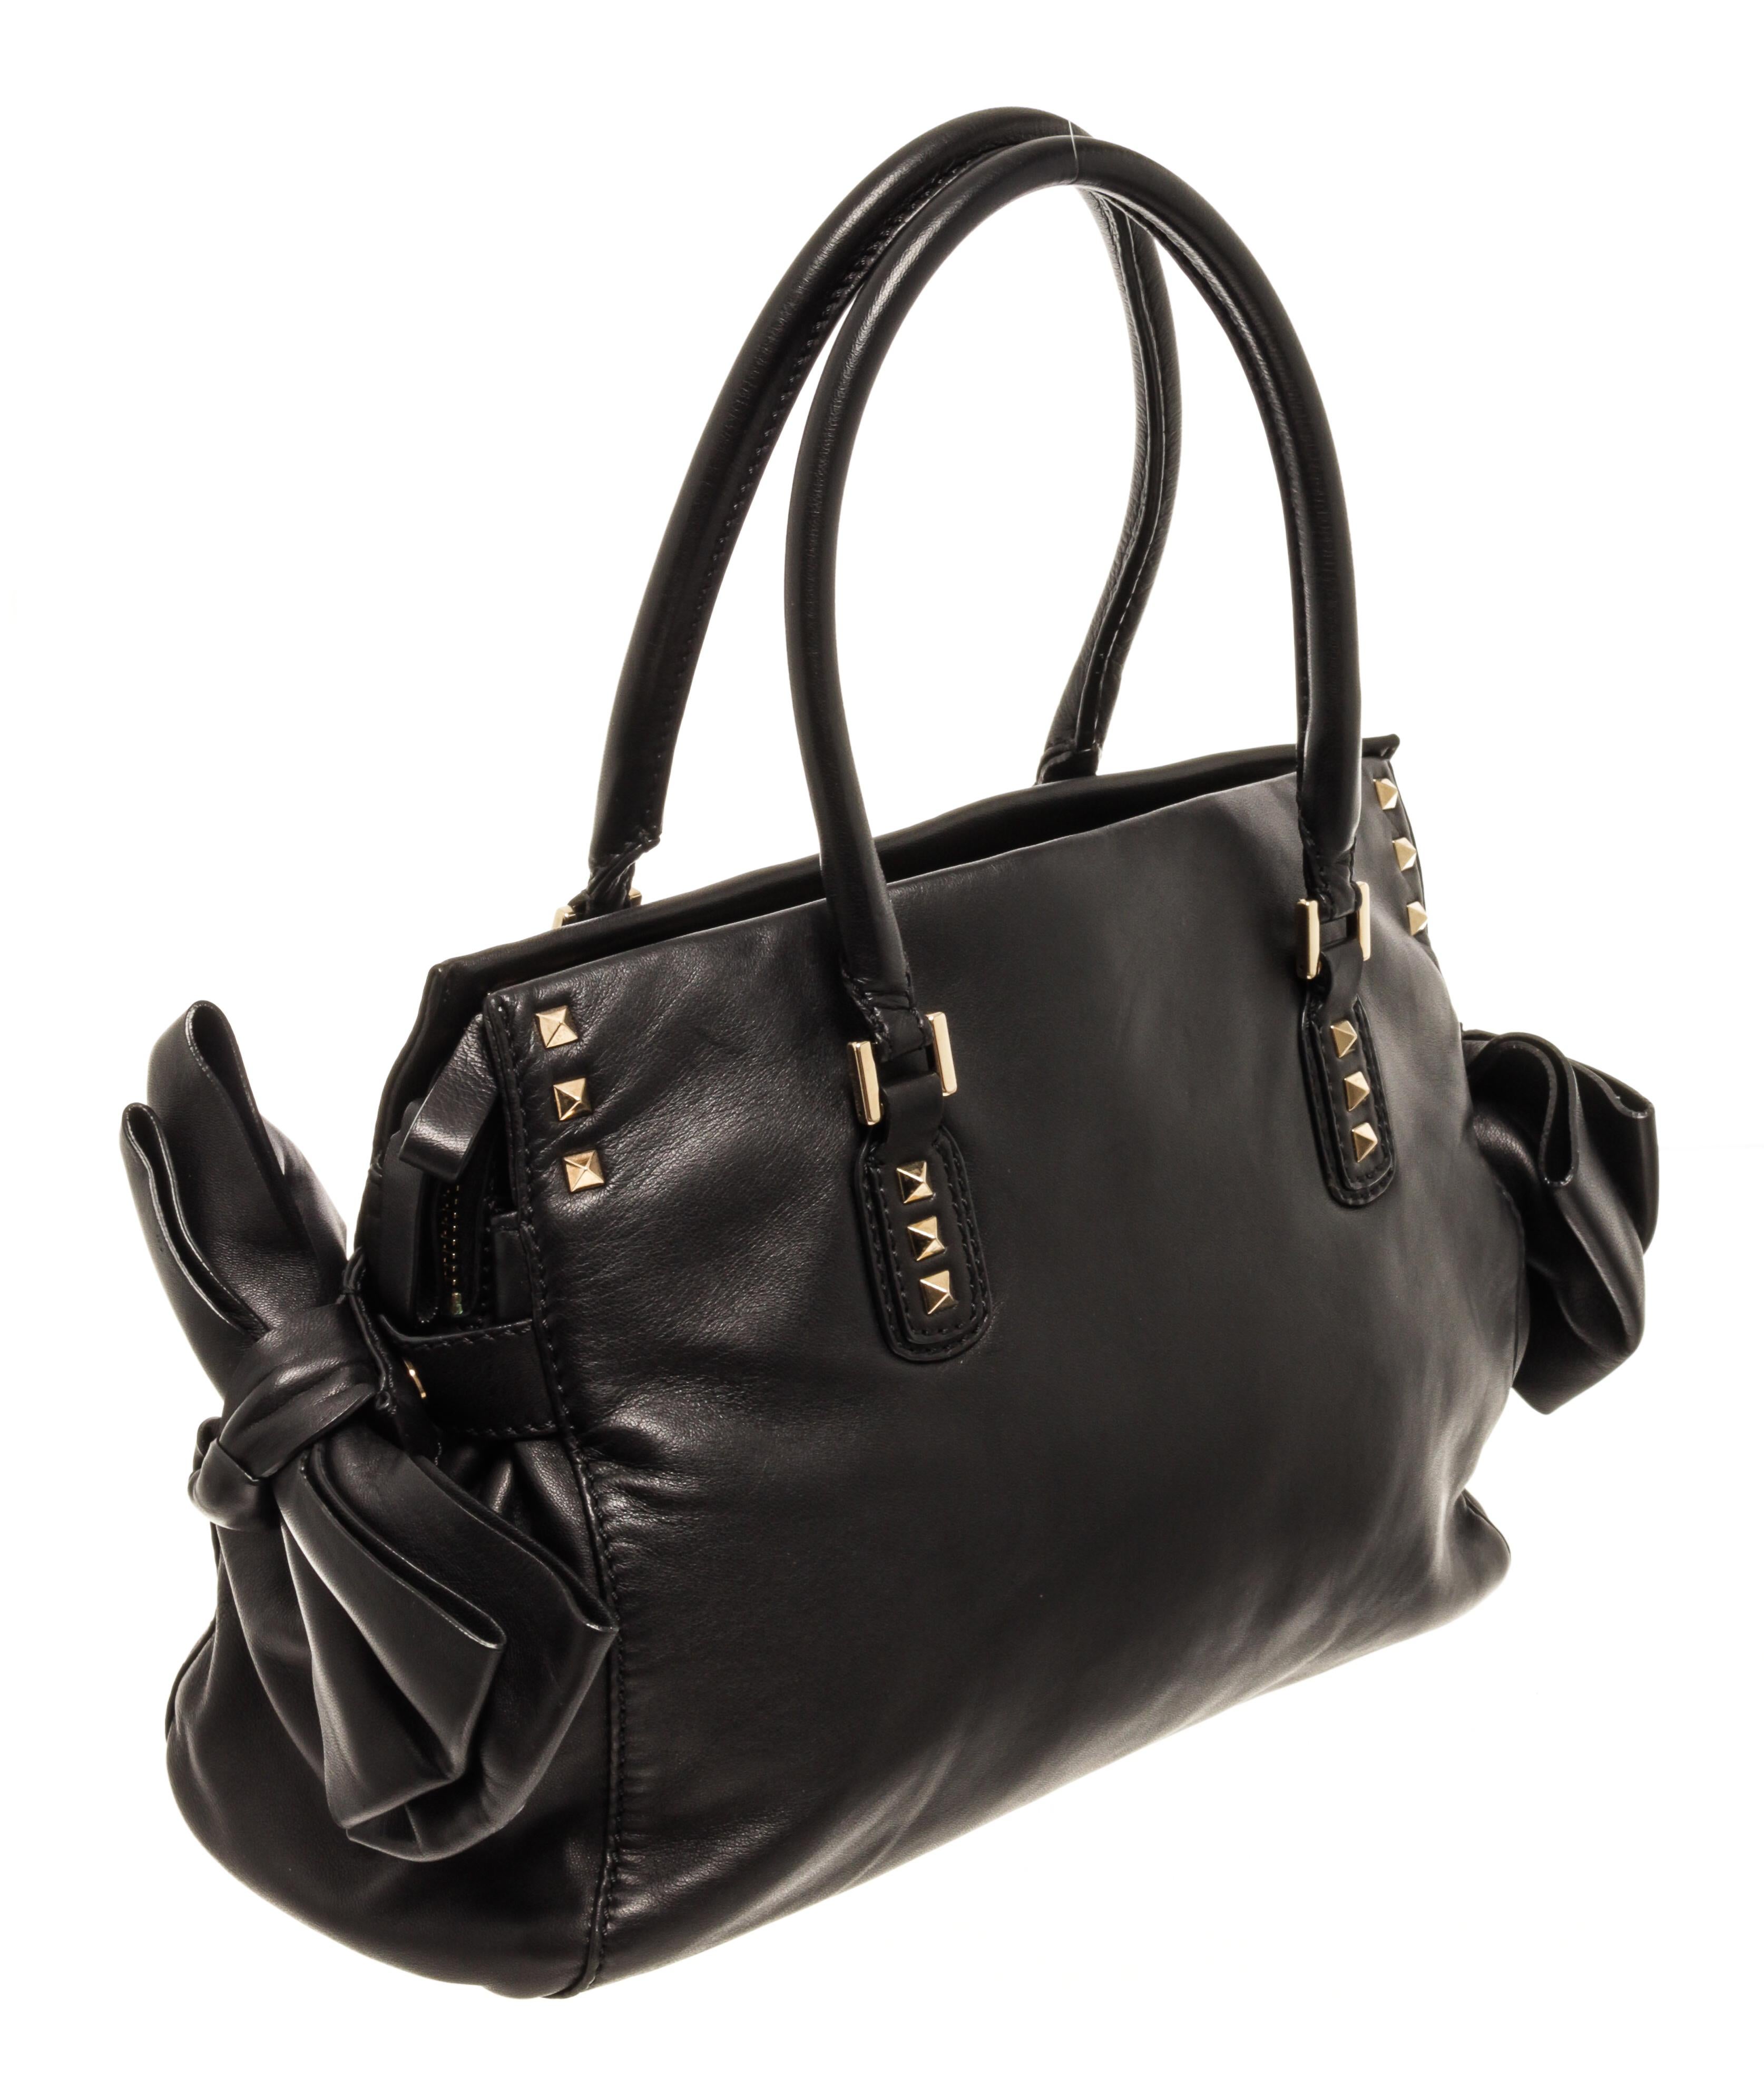 Valentino Black Leather Bow Convertible Handbag In Good Condition For Sale In Irvine, CA